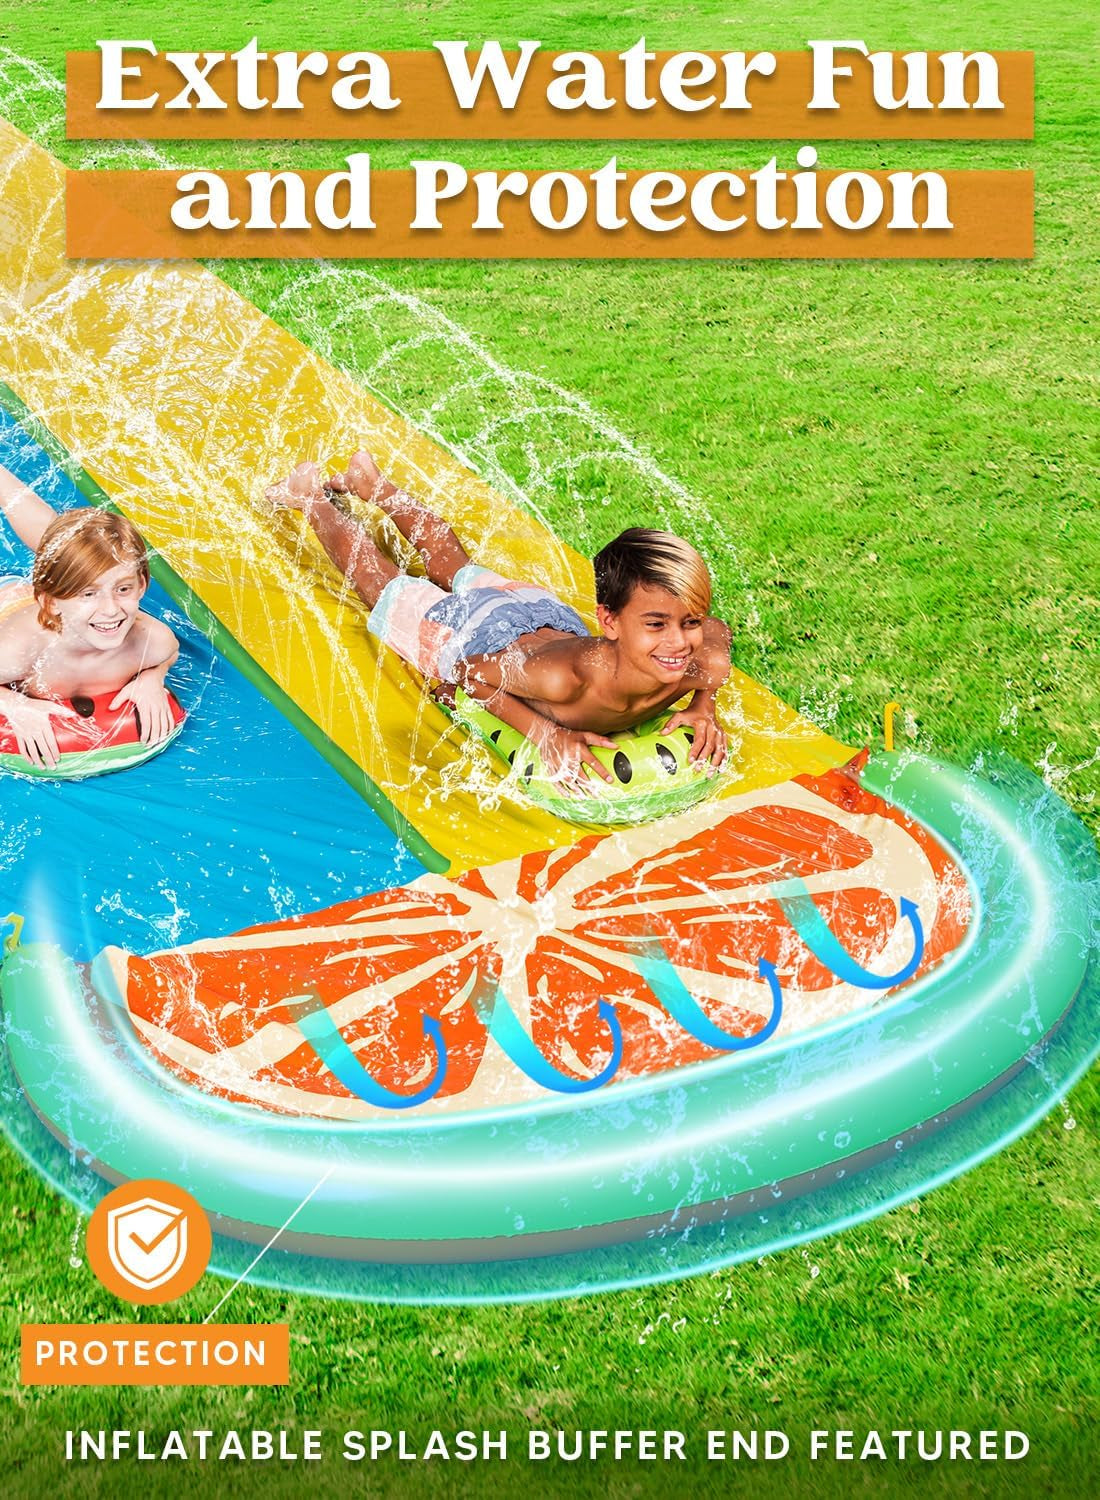 22.5Ft Double Water Slides with 2 Body Boards Backyard Outdoor Slip Lawn Waterslide 2 Sliding Racing Lanes with Sprinklers Summer Water Toy, Orange